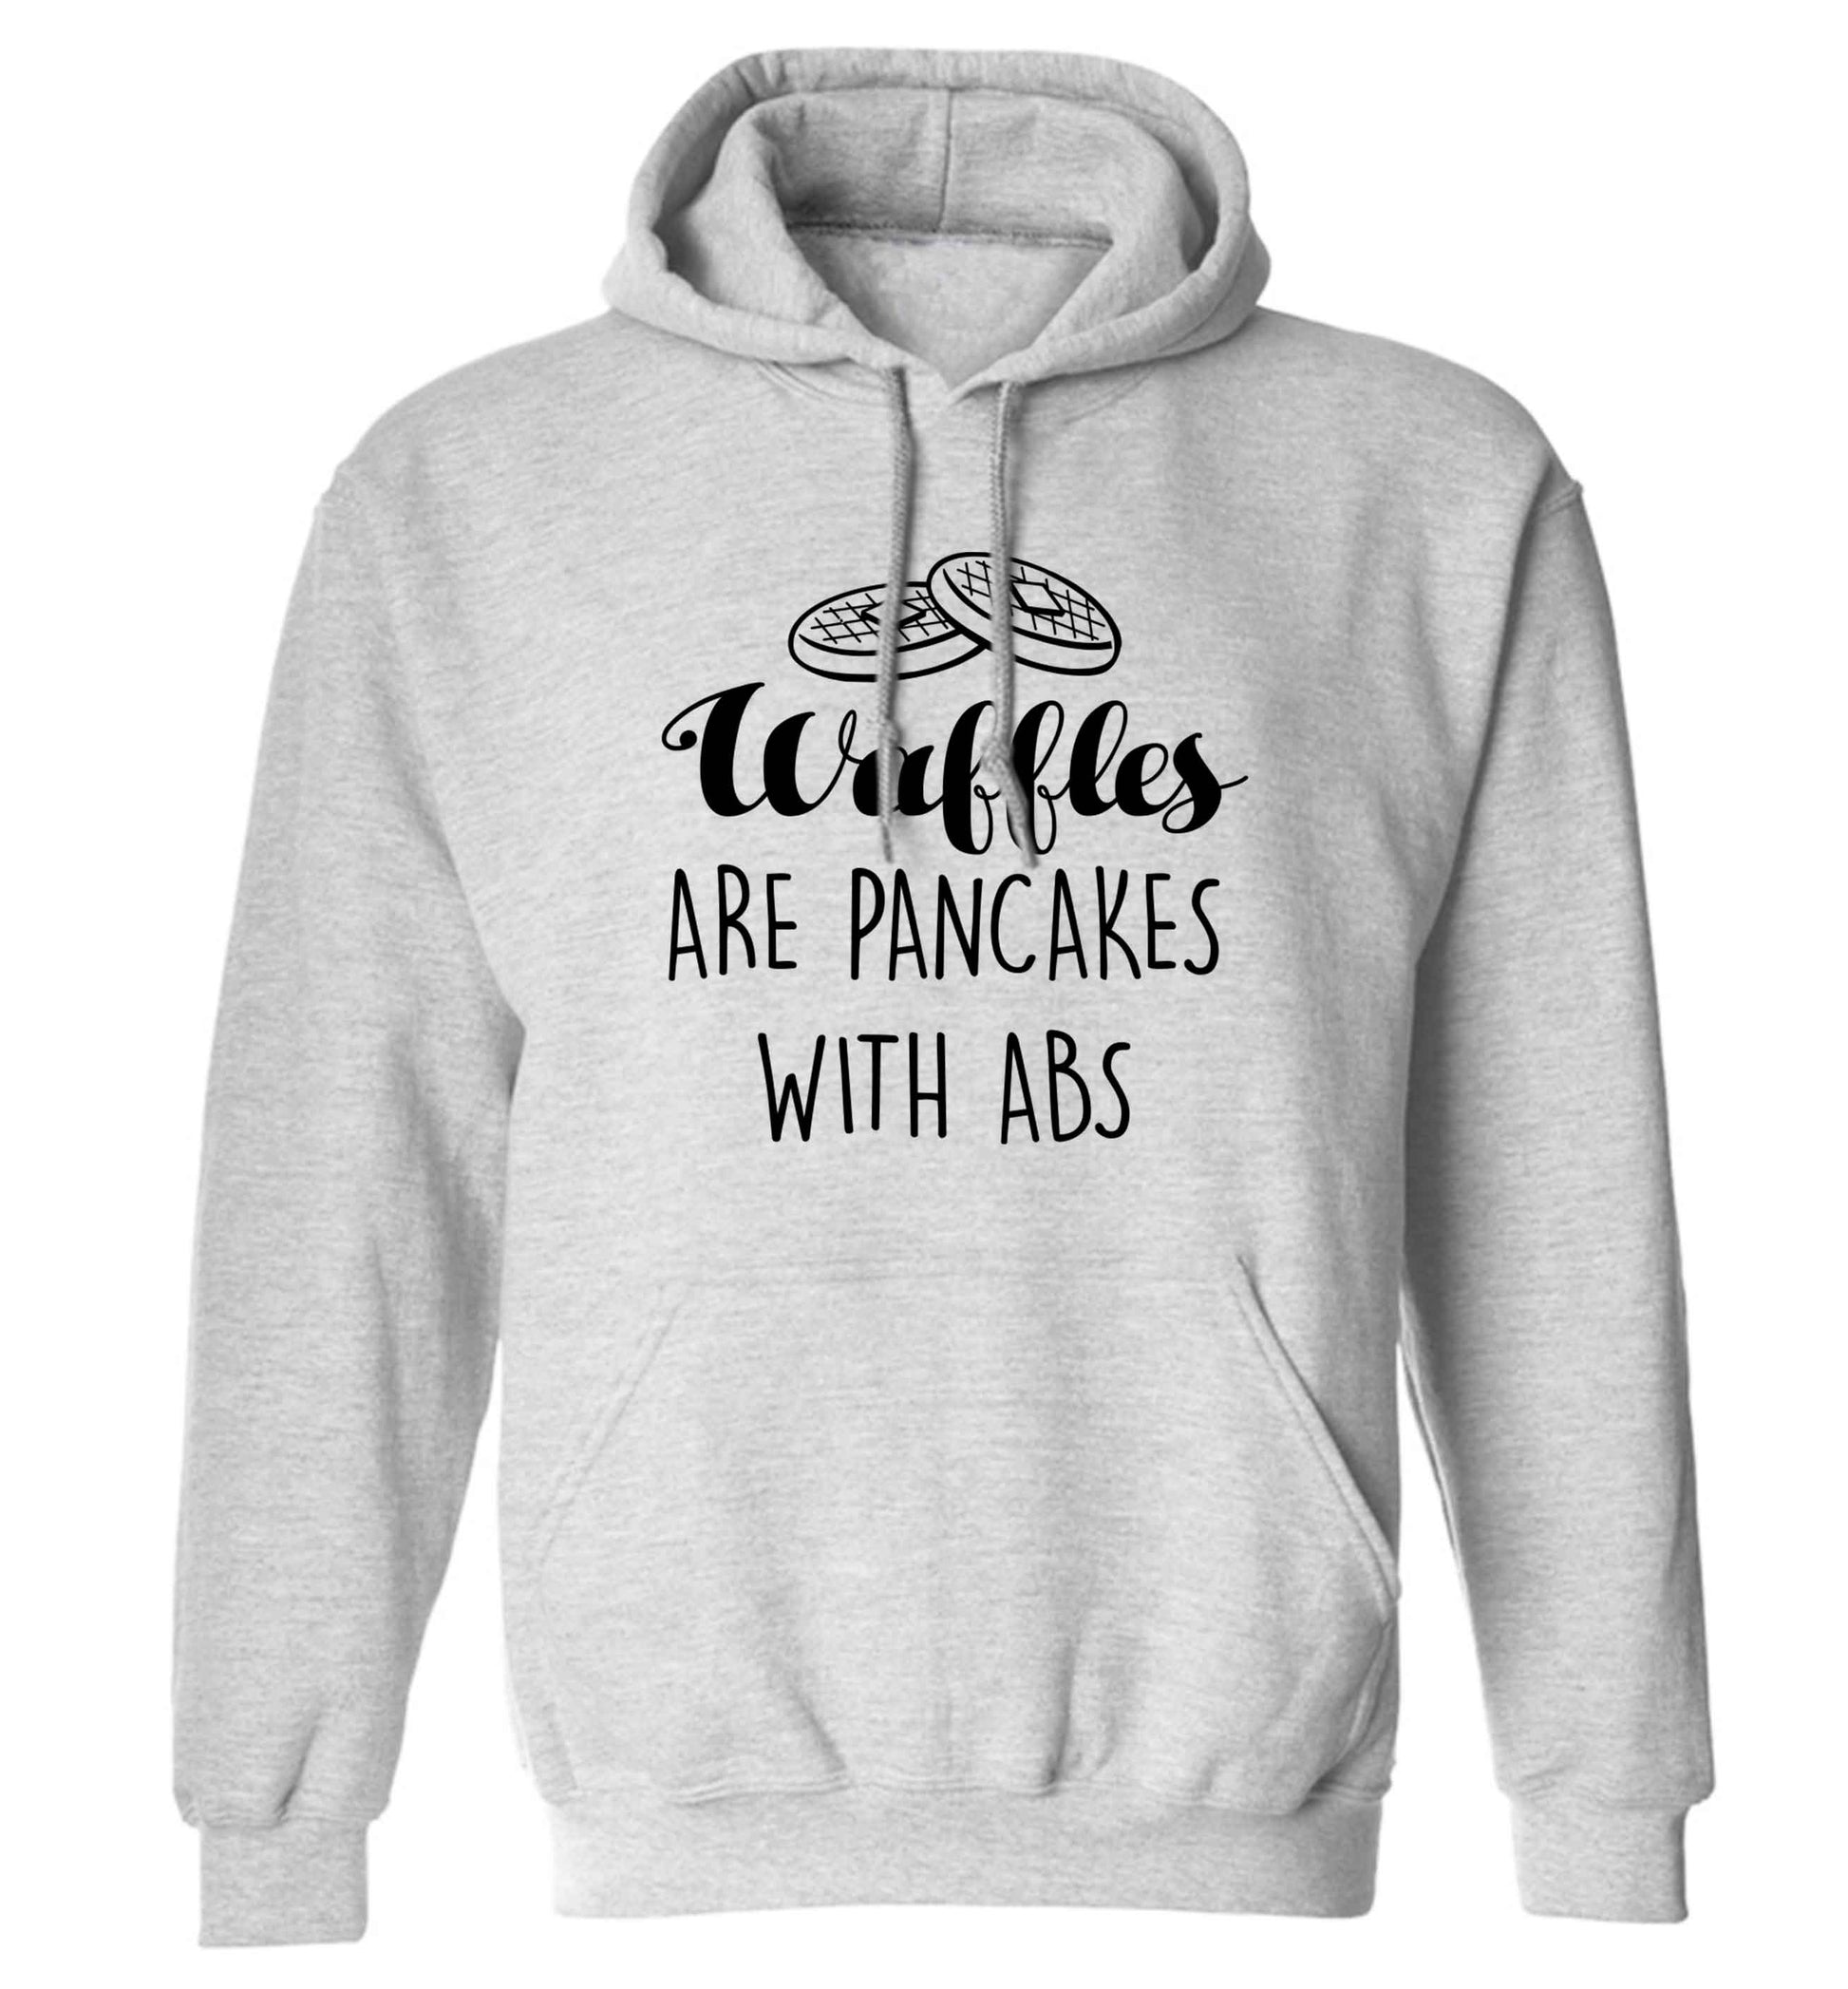 Waffles are just pancakes with abs adults unisex grey hoodie 2XL